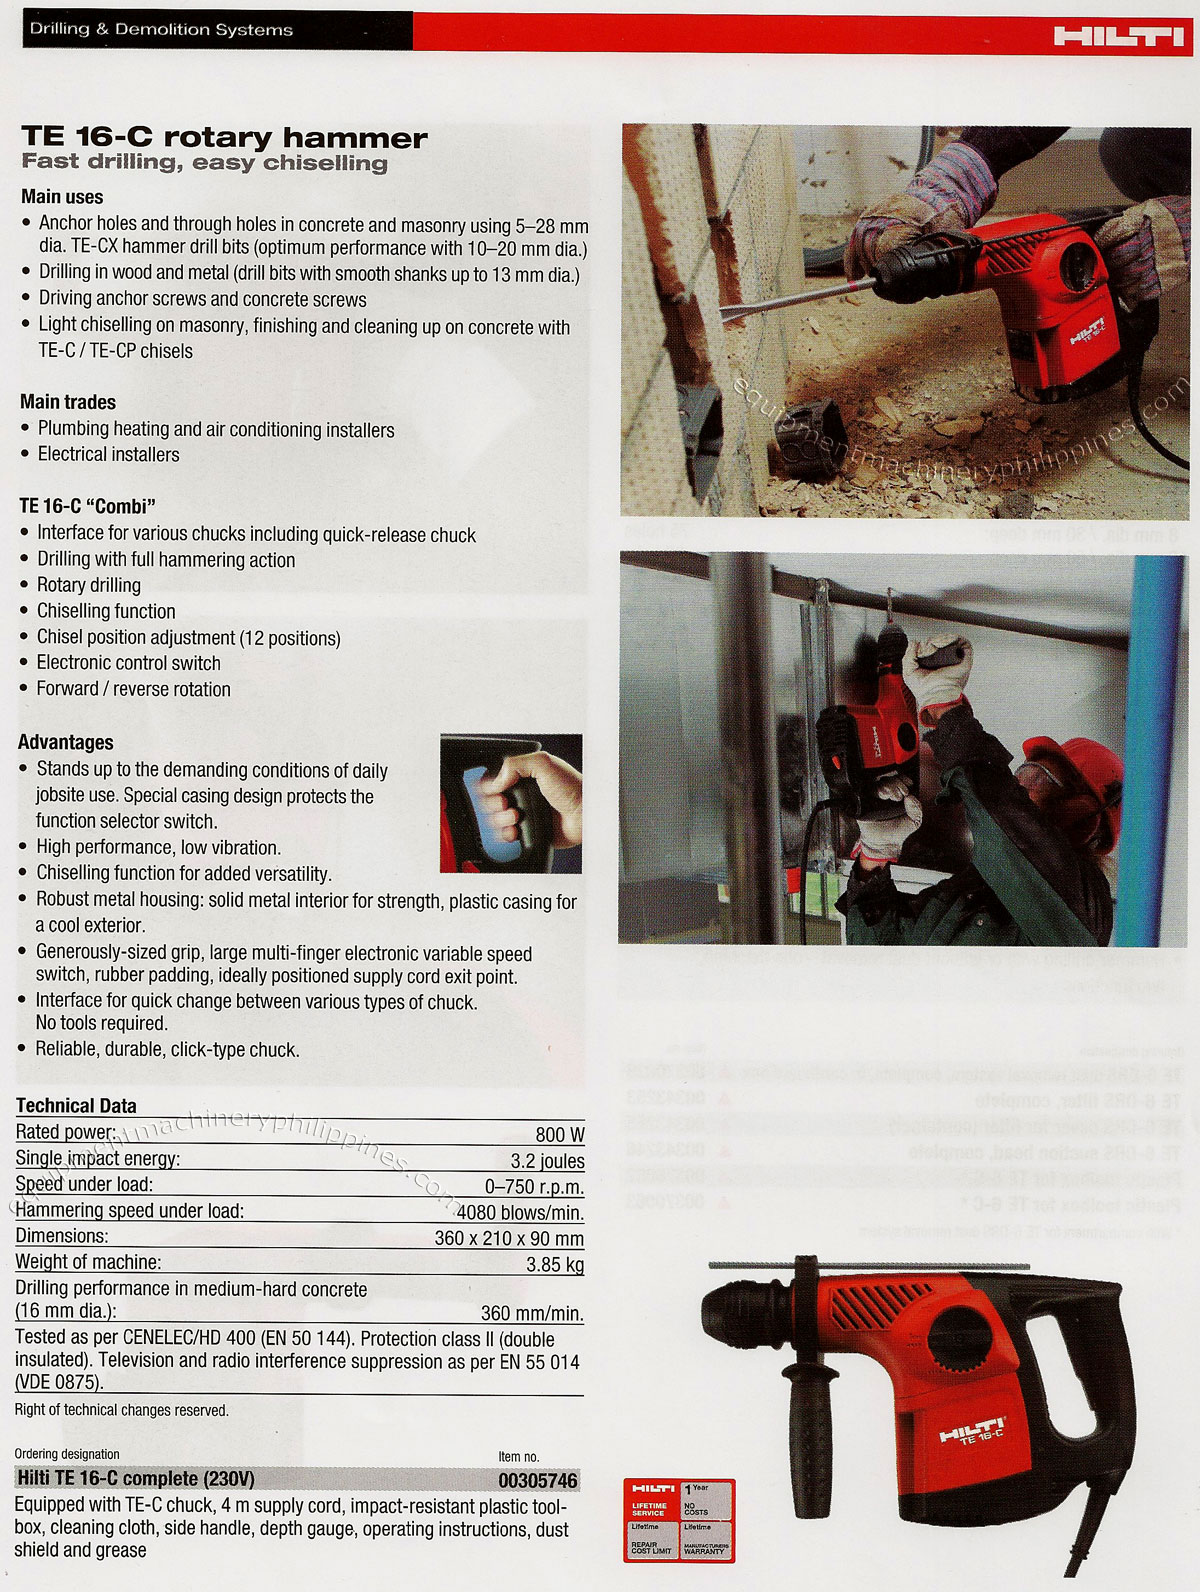 TE 16 C Rotary Hammer for Fast Drilling Easy Chiseling